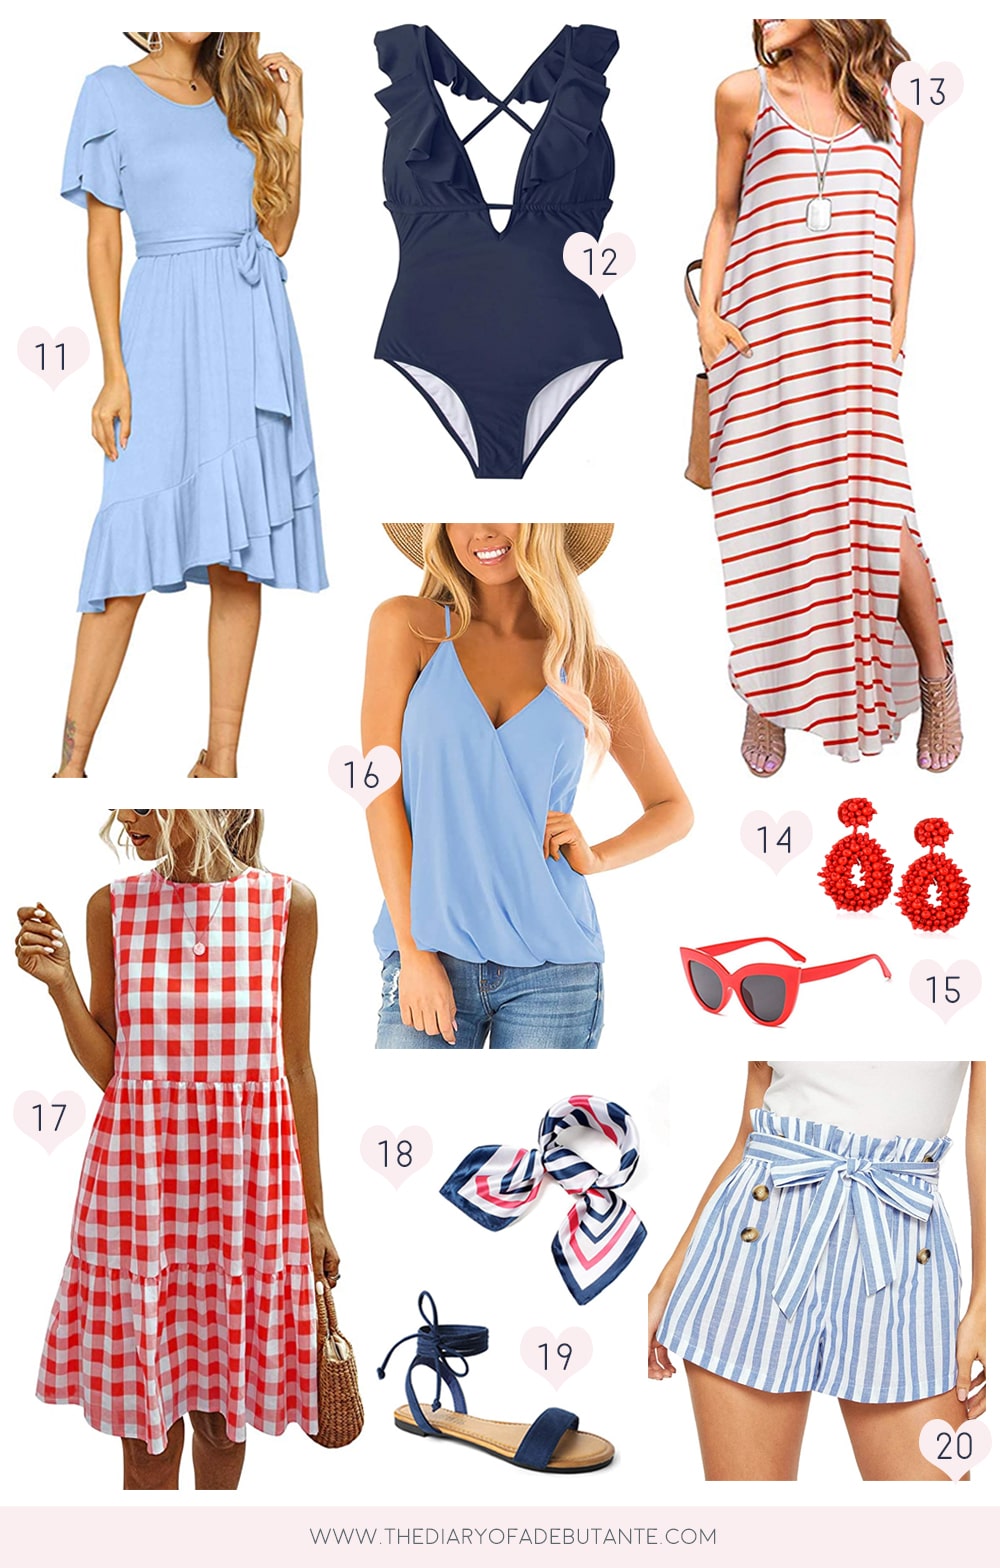 Affordable fashion blogger Stephanie Ziajka shares her favorite affordable 4th of July Amazon fashion finds on Diary of a Debutante